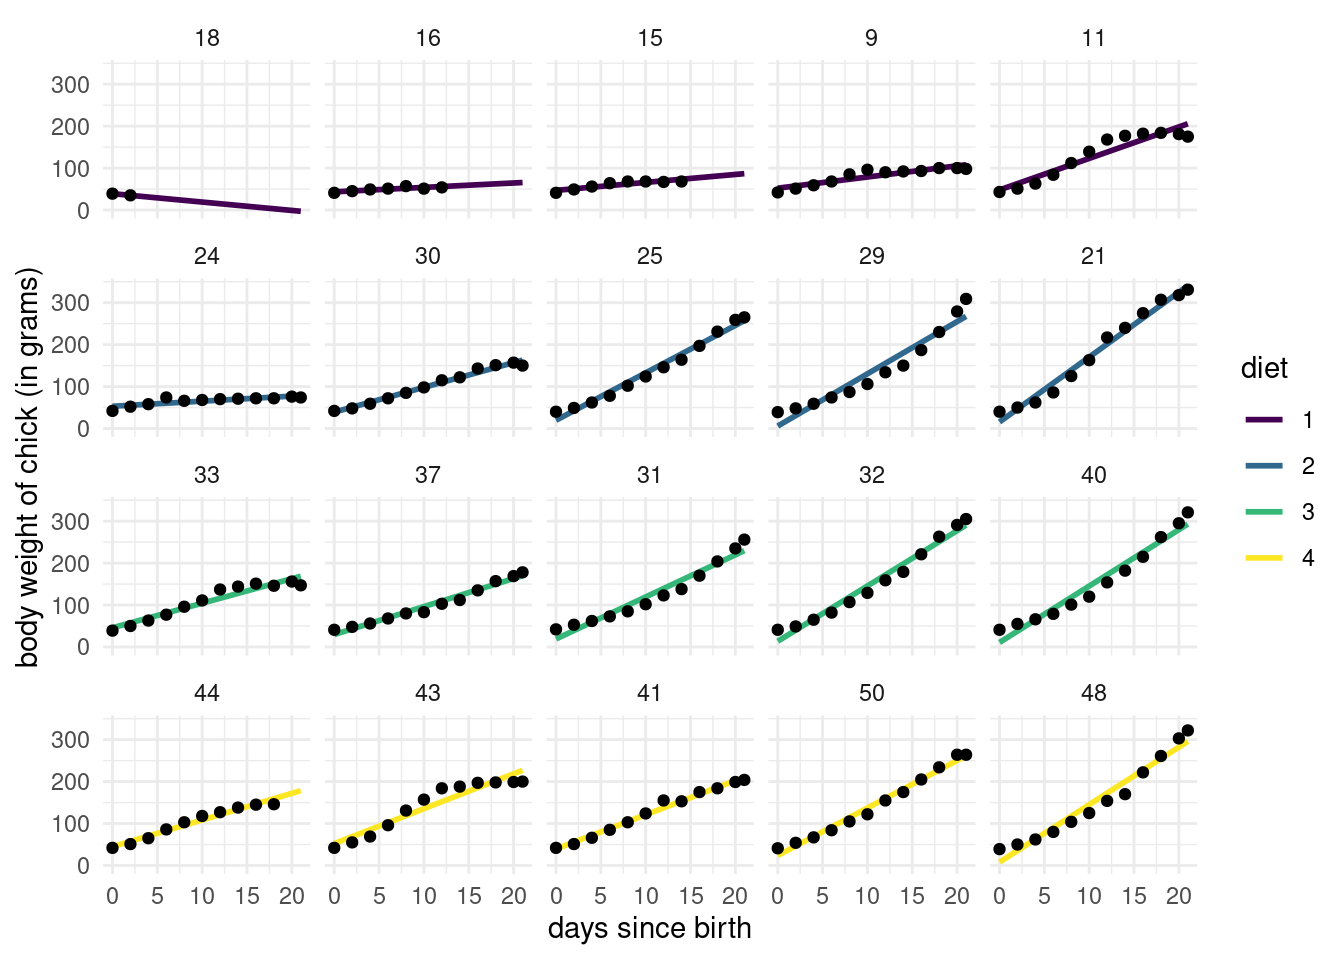 Chicken weight growth curve, ordered by weight. Each row corresponds to a different diet.